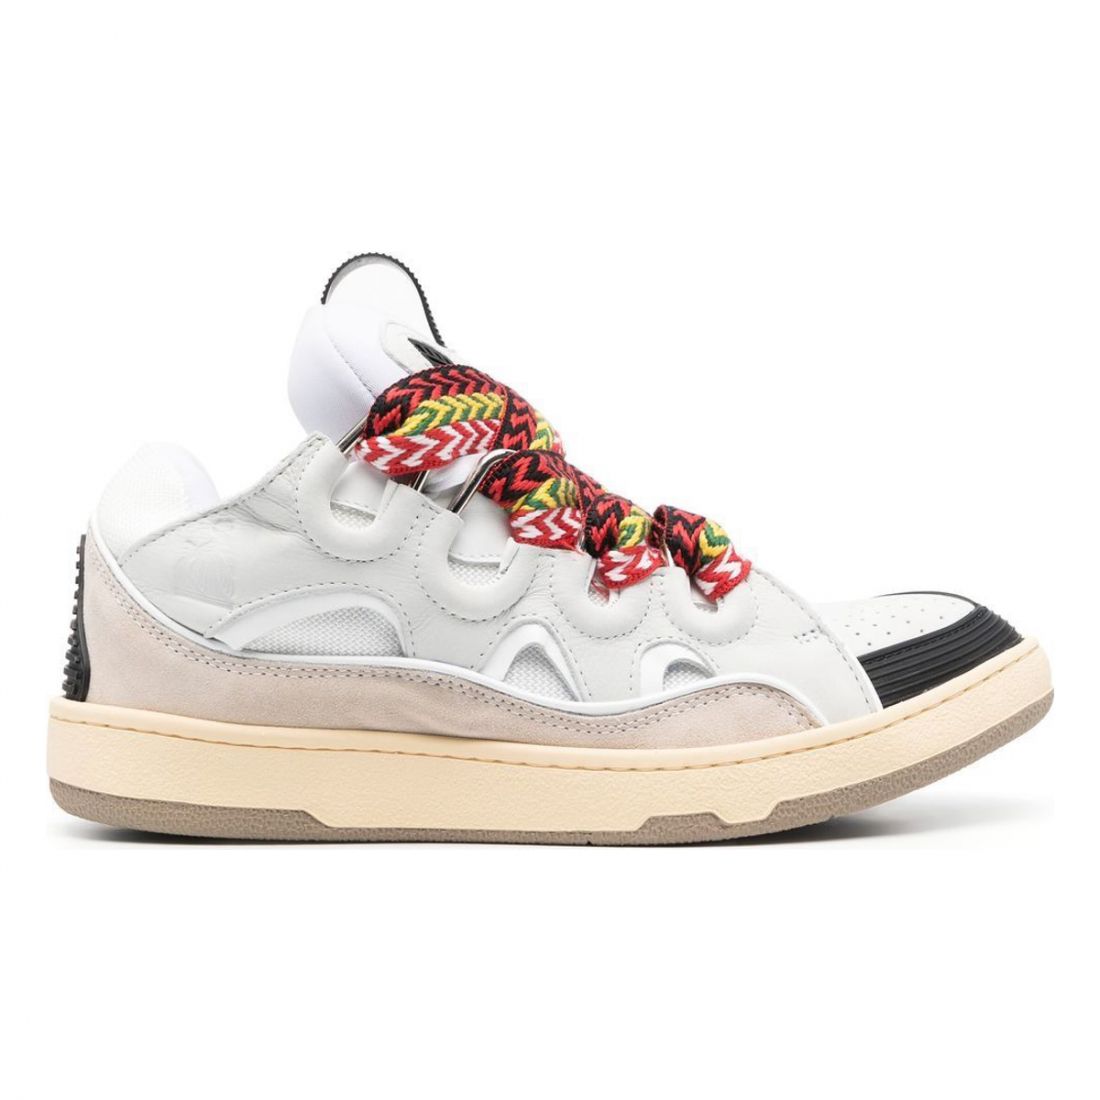 Lanvin - Sneakers 'Chunky' pour Femmes